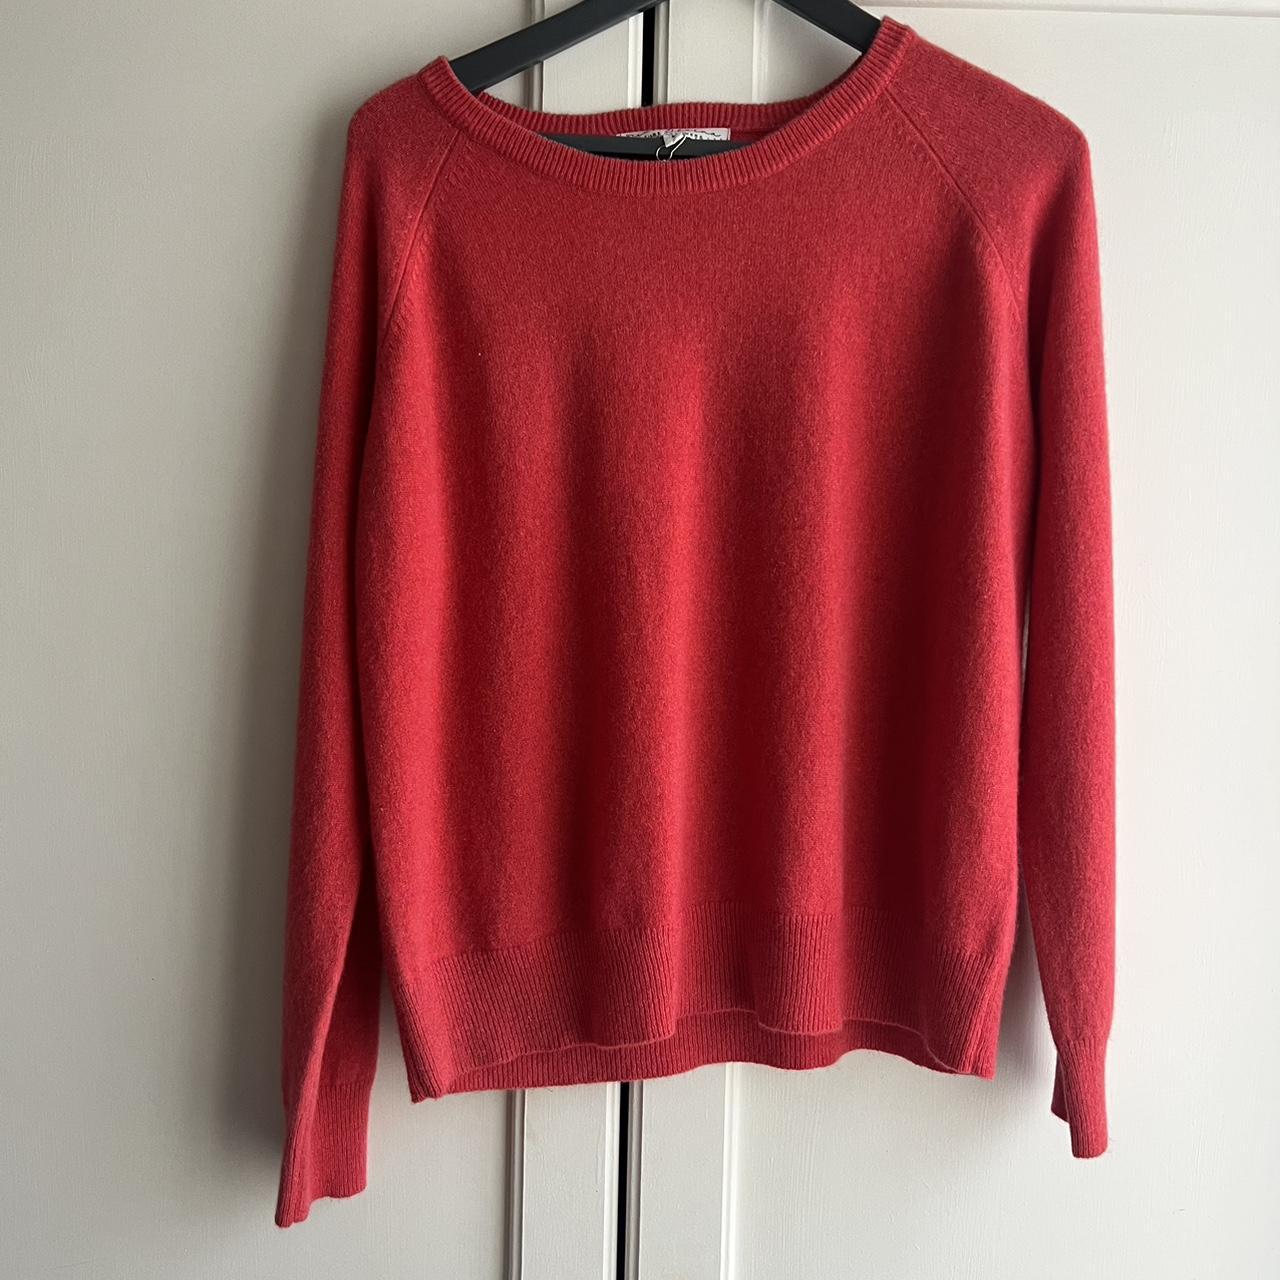 100% cashmere red jumper with tags. Purchased in... - Depop